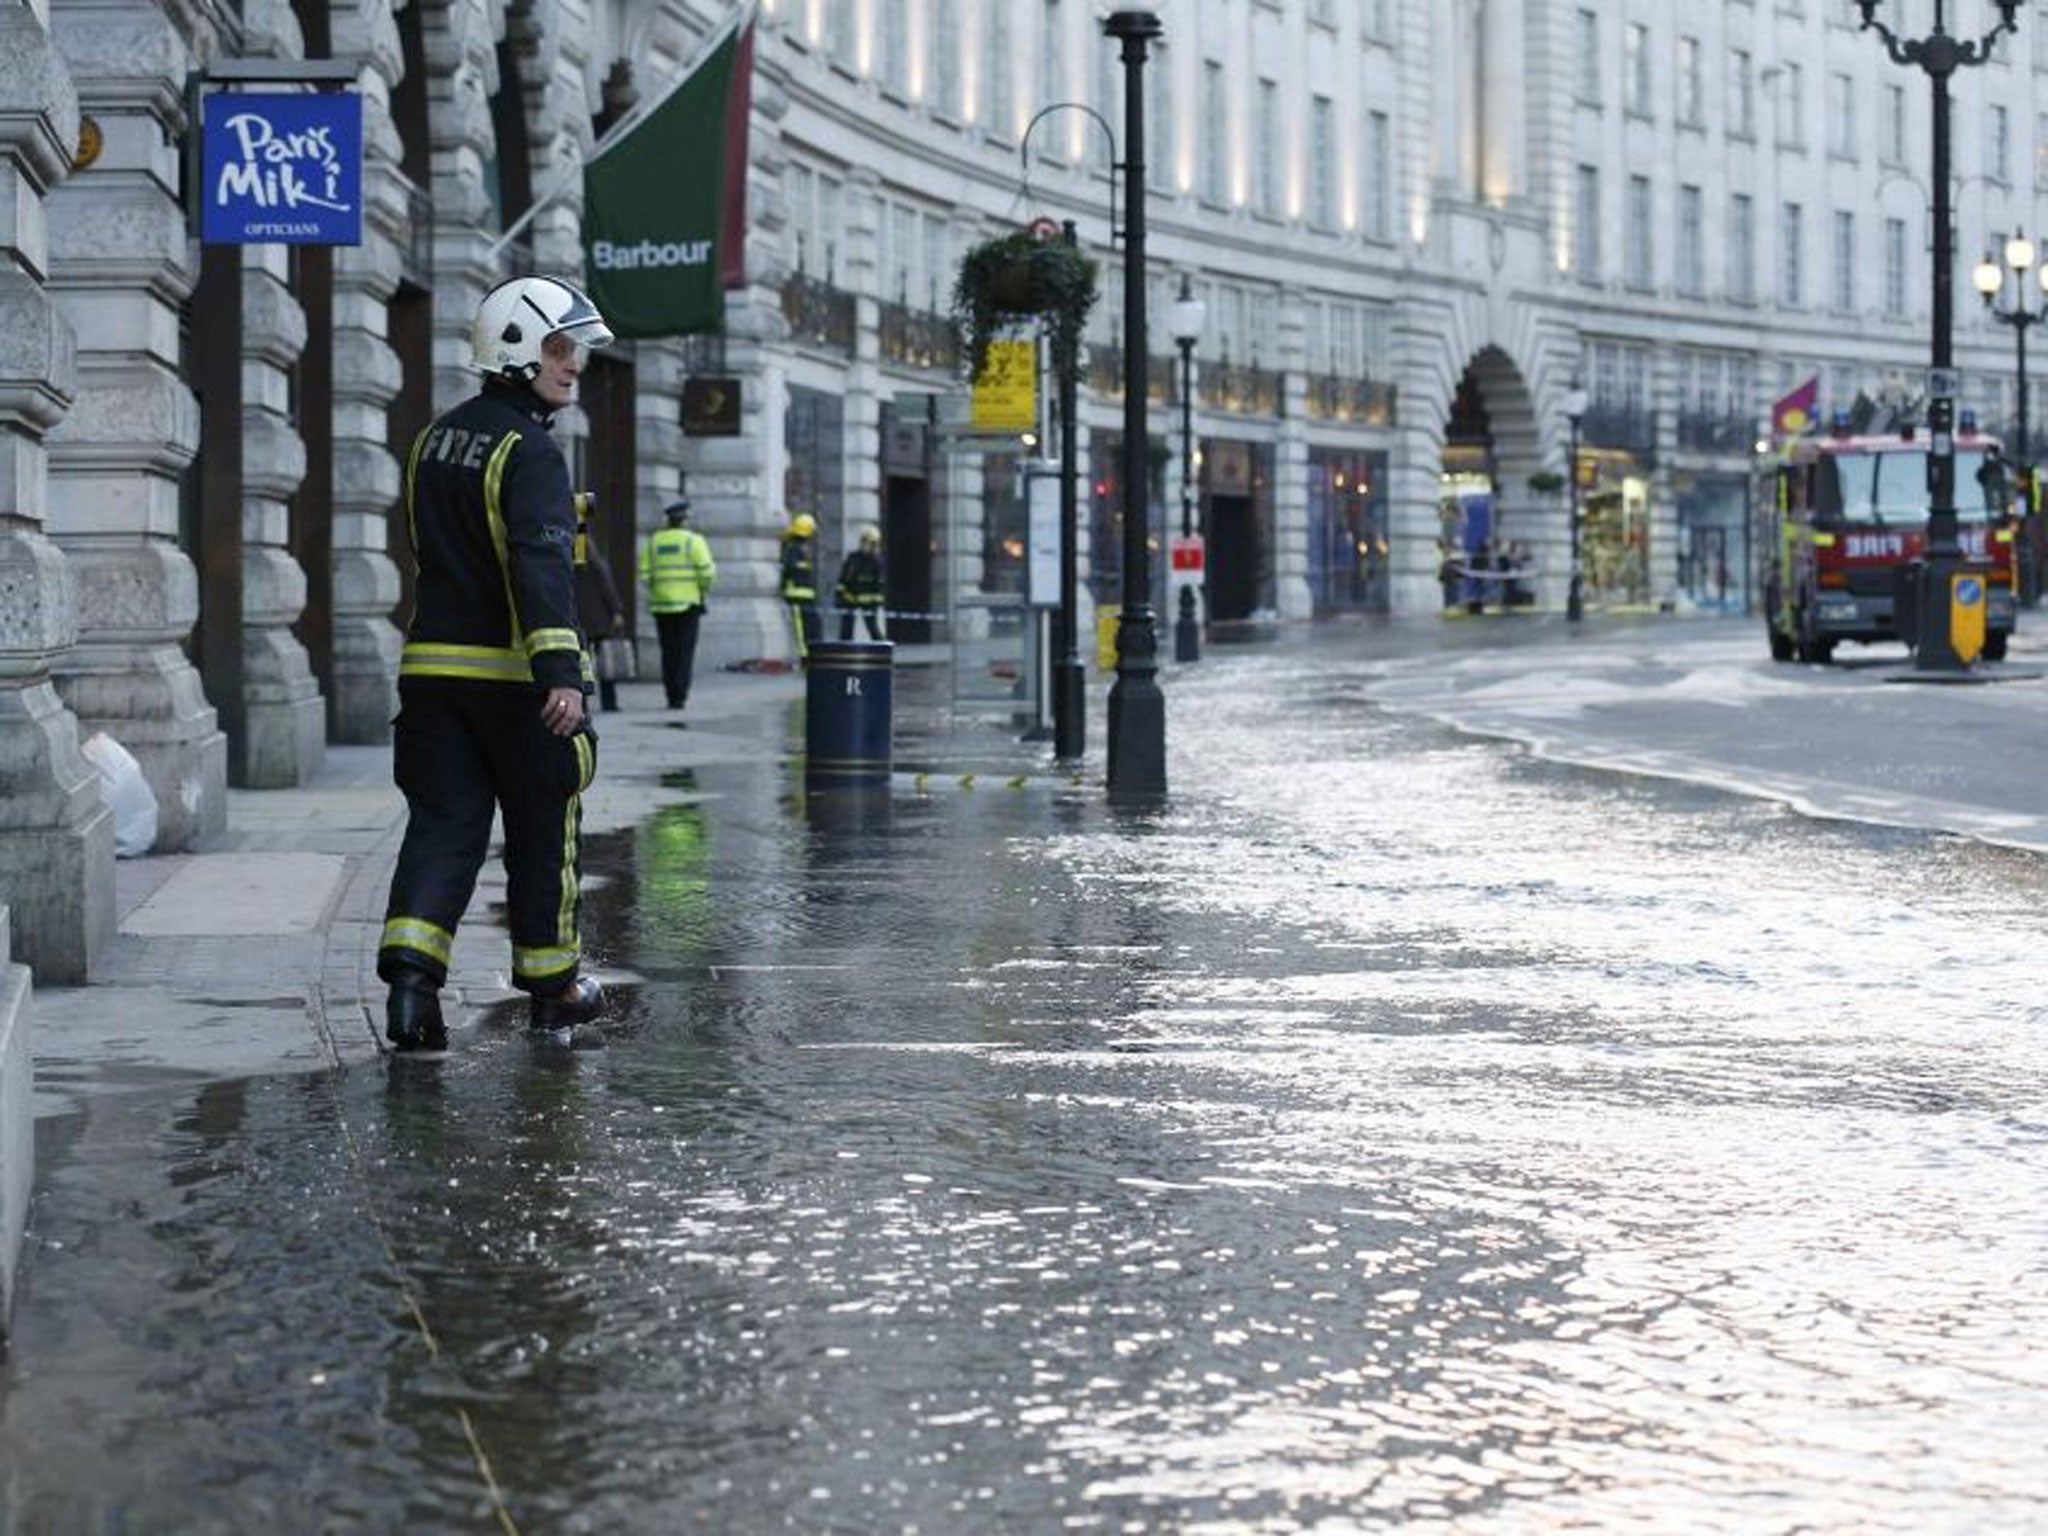 A firefighter investigates flooding caused by a burst water main on the Regent Street